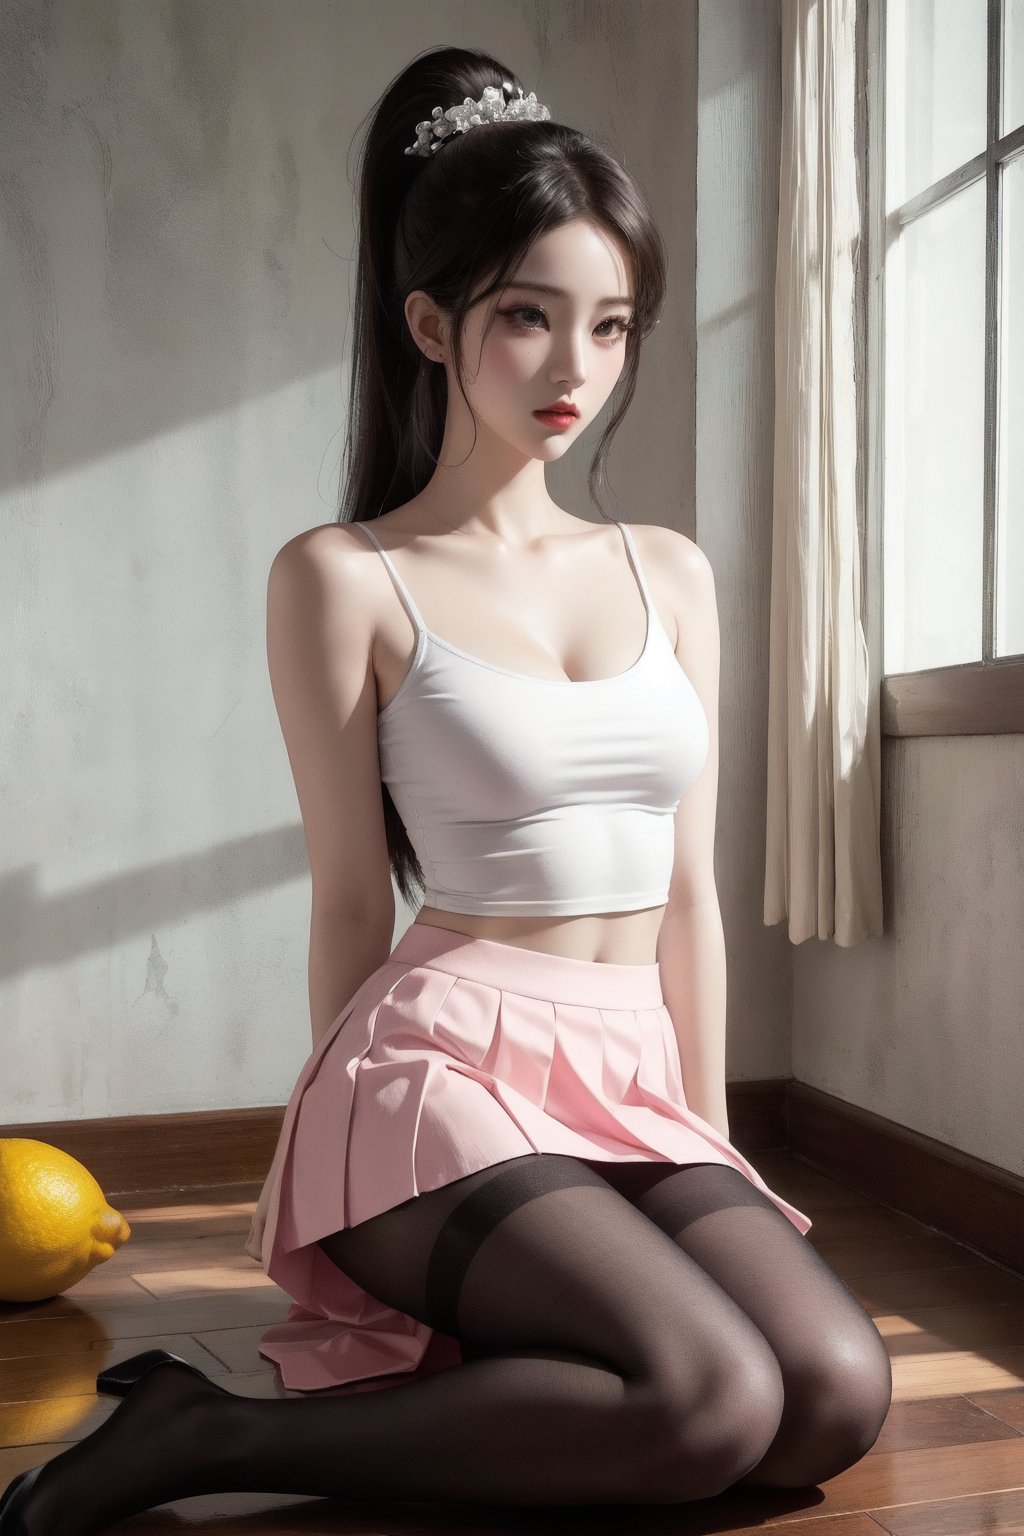 (half body ) (White shirt)  ( pink skirt), 1girl,pretty face,High definition face,make up,crying, large open breasts , cleavage, arms tied behind back ,mmg2.0,  shiny black shiny  thin pantyhose,Take off school uniform,Barbie Bedroom,medium_breast_bondage,enakorin,ffff,Plump thighs,bust_shot,wings,reina_miyoshi, cute girl,both knees erect lying floor,Small shoulder,Narrow shoulders,no wings,cute,white shose,Front view,Characters fill the picture,The head is in the picture,qbyc,silver,klee (genshin impact),diaochan,double ponytail,OD,women,blond hair,mecha,hina,lemon0028,Face close-up,Beautiful eyelashes,2 legs,EpicStyle,Young beauty spirit ,Best face ever in the world,face_veil